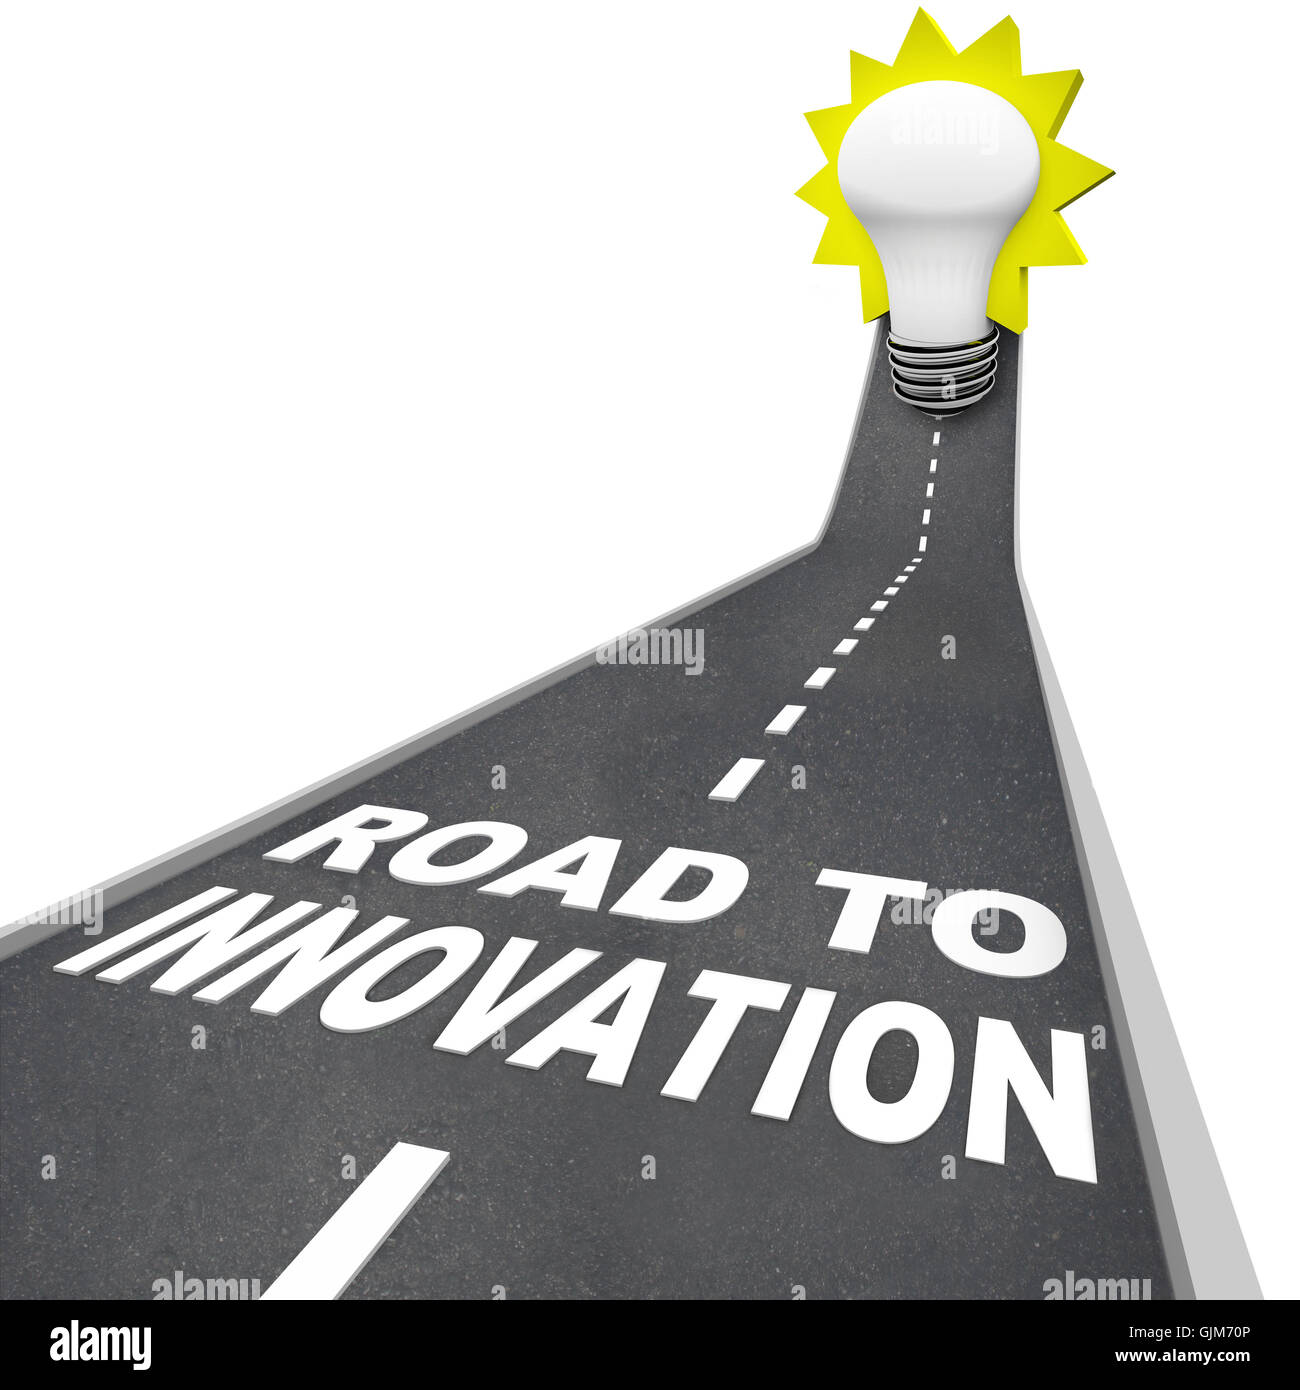 Road to Innovation - Path to Creative Problem Solving Stock Photo